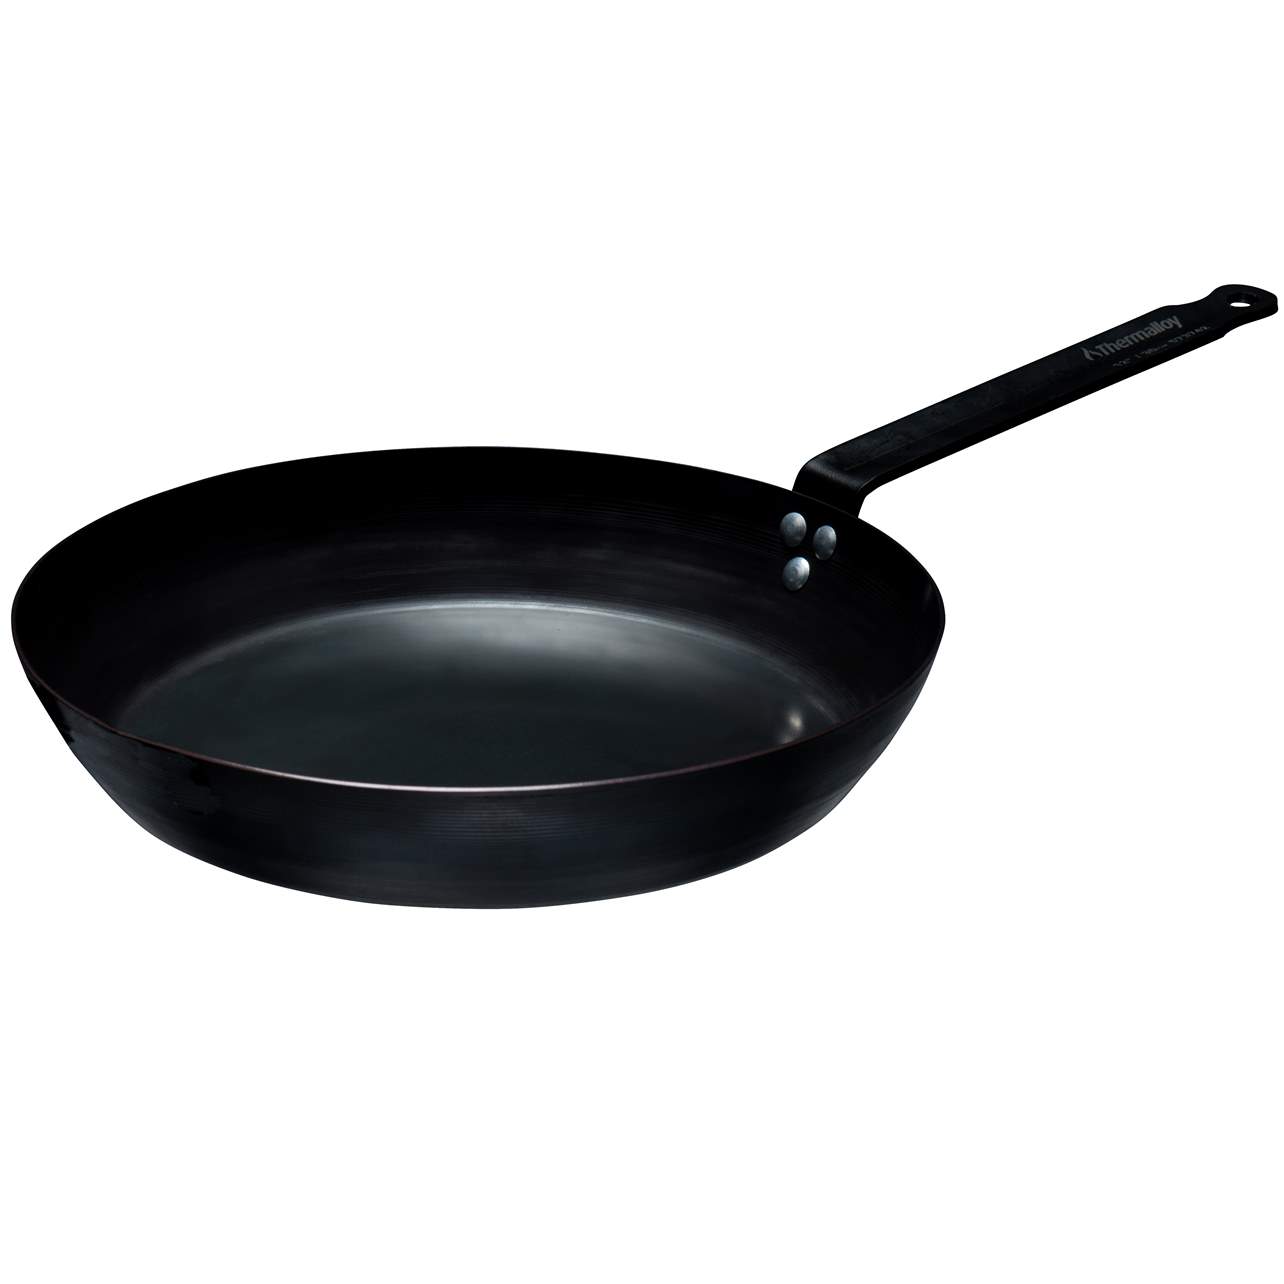 Thermalloy Carbon Steel Fry Pan | 26cm